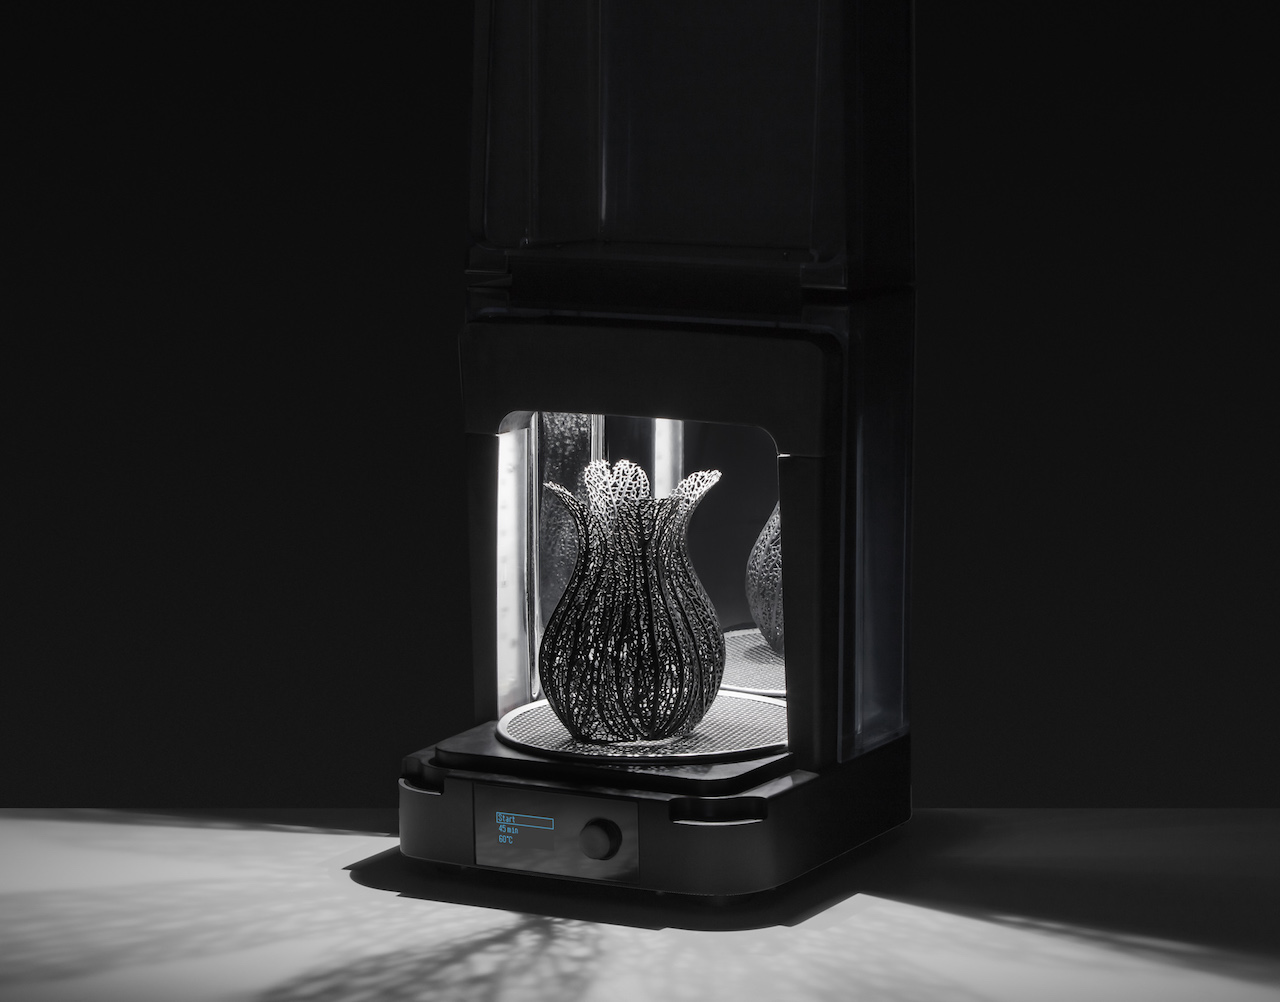  The new Formlabs Form Cure, shown curing a Nervous System 3D design 